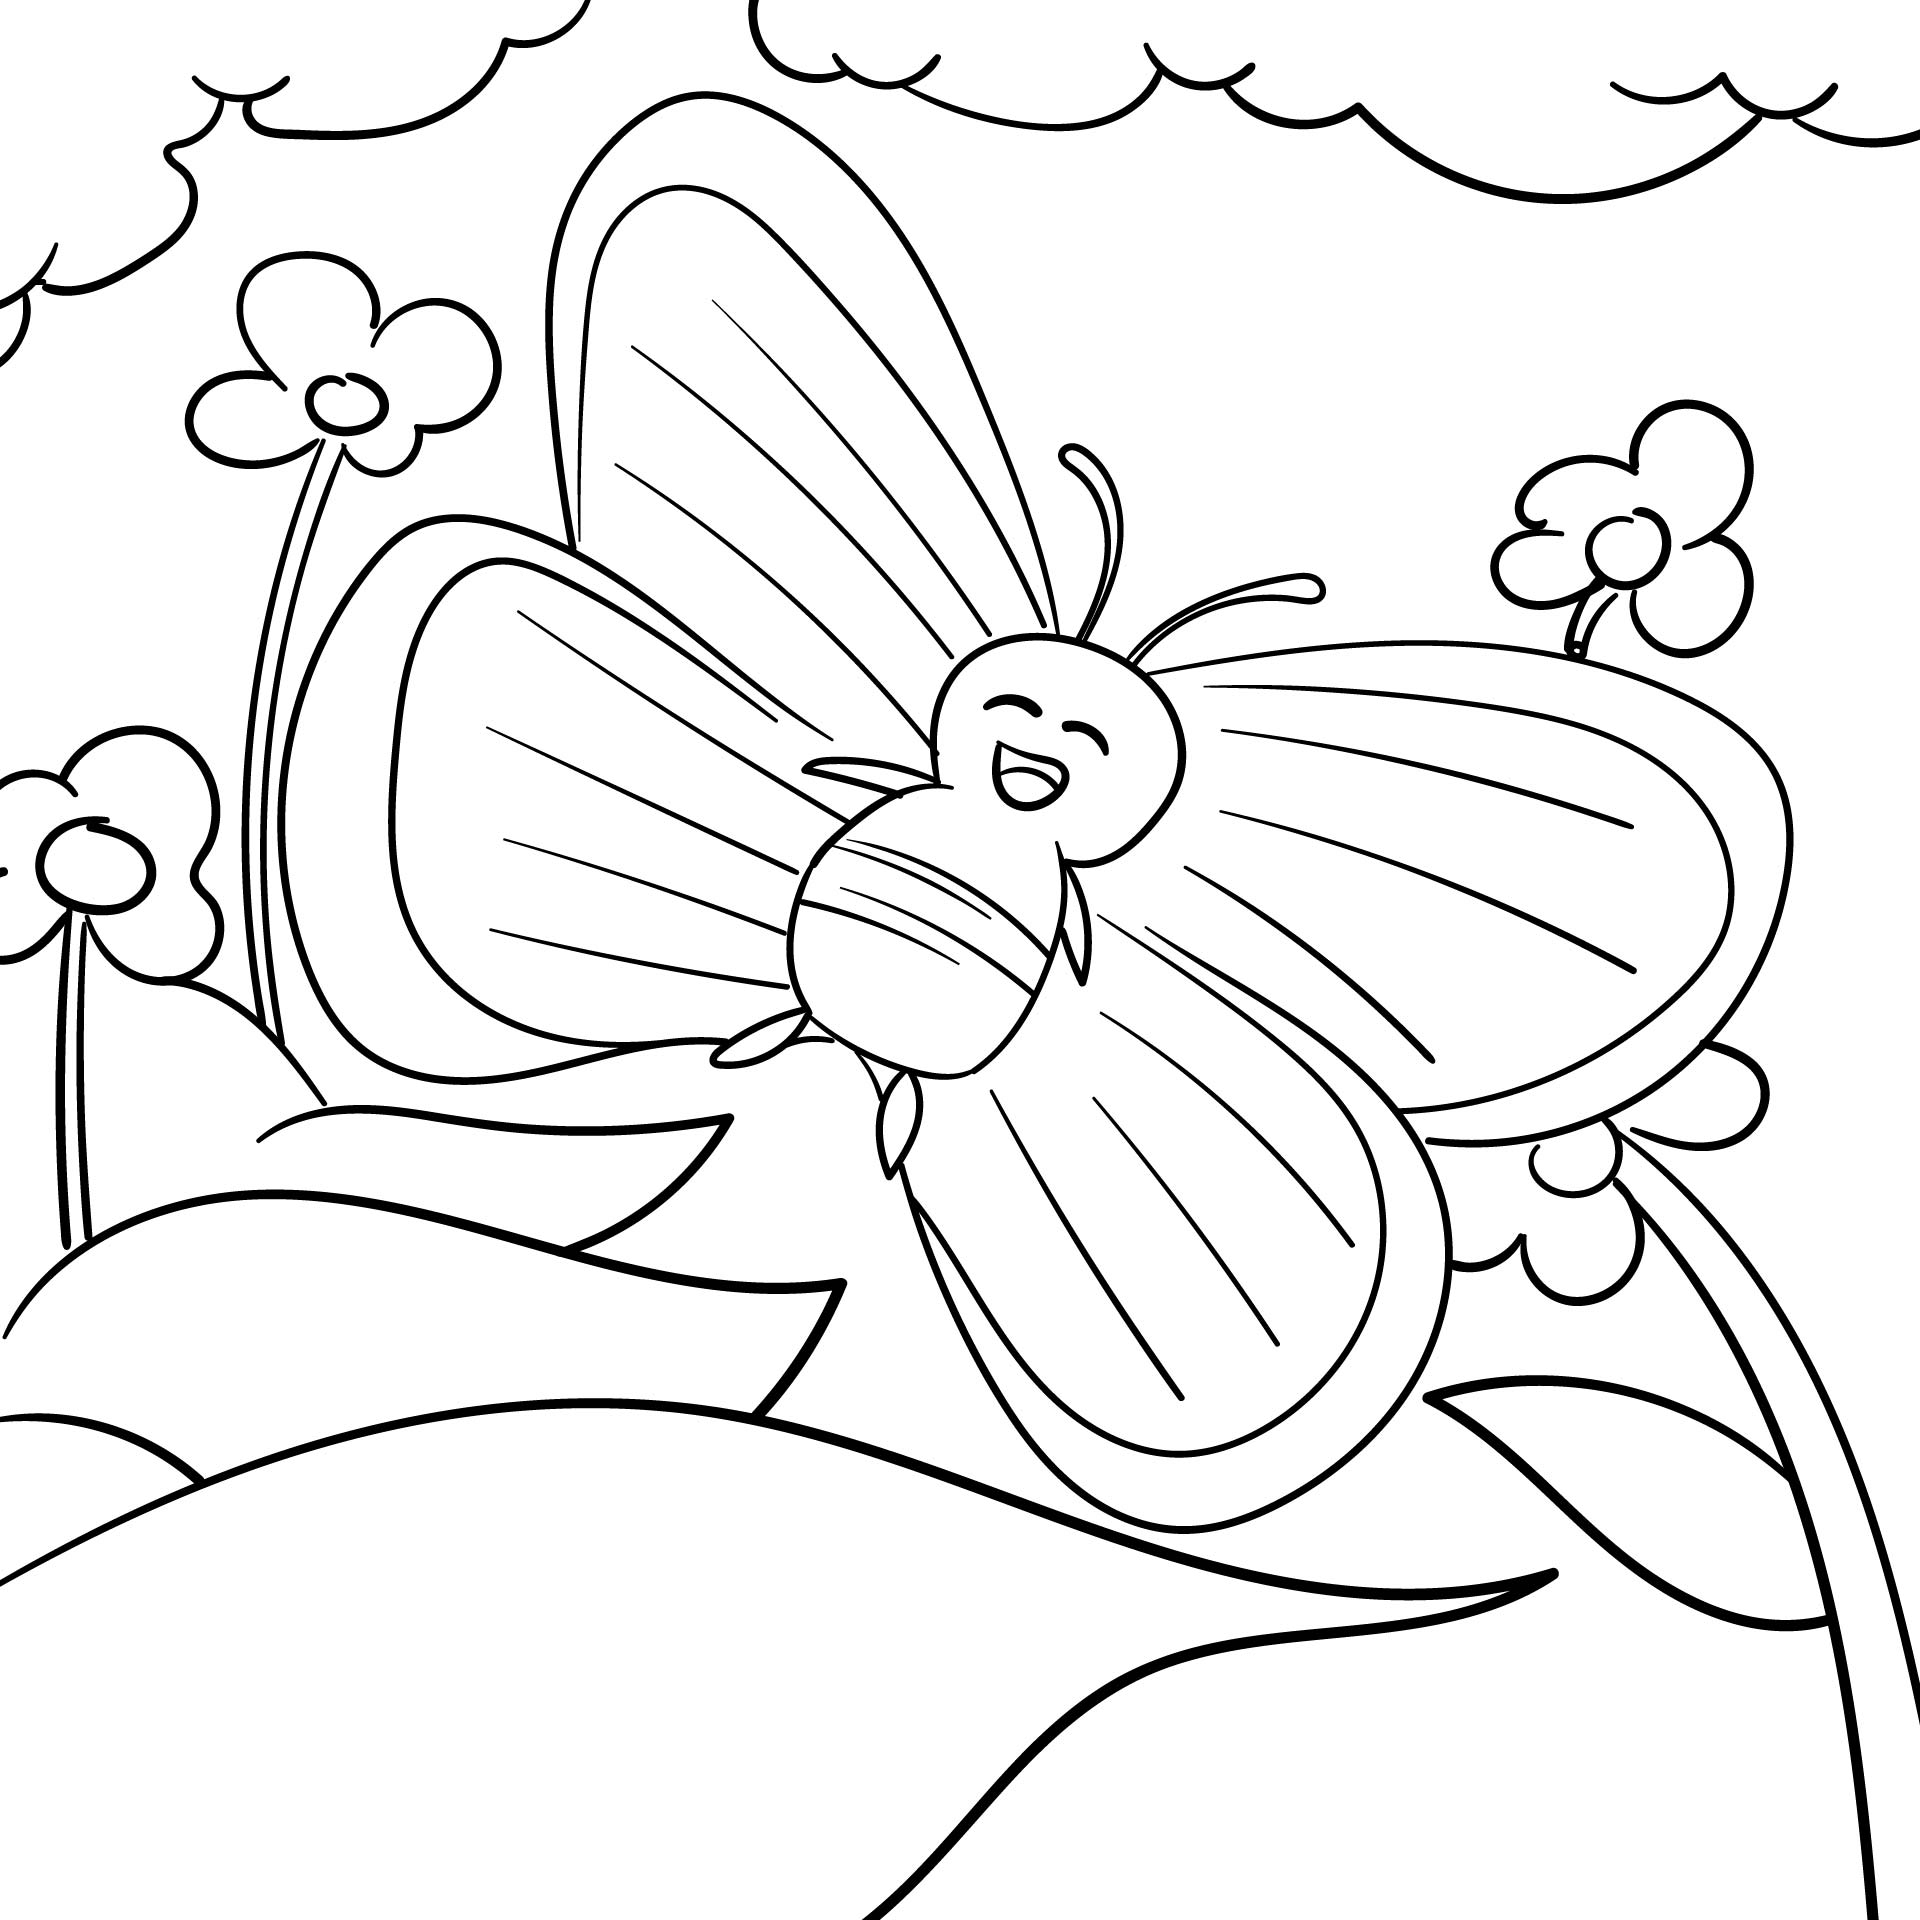 Butterfly Coloring Pages For Kids Preschool And Kindergarten